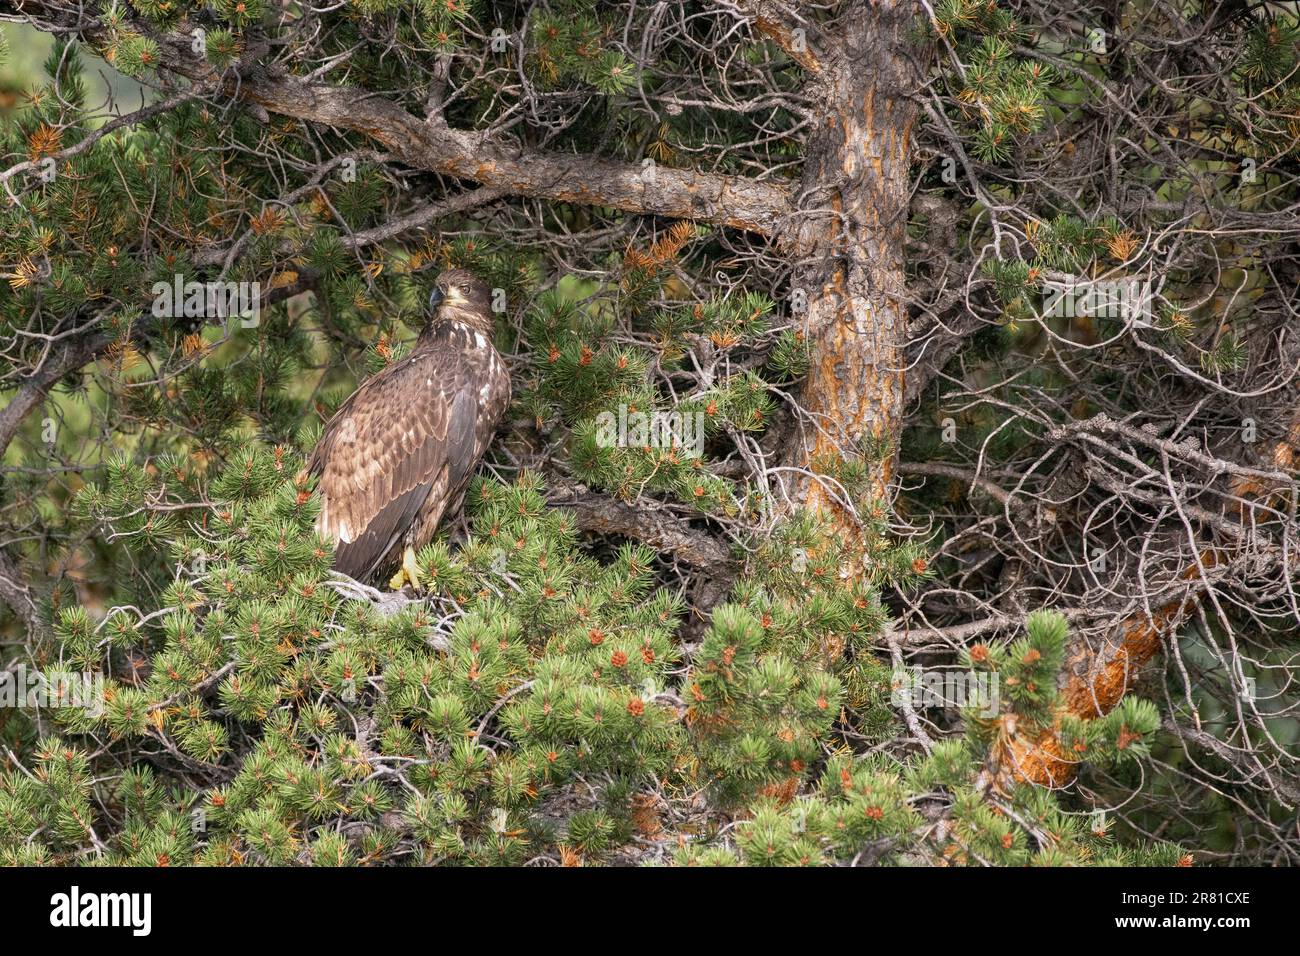 Camouflaged juvenile eagle in a lodgepole pine tree, Chilko Lake, BC Stock Photo